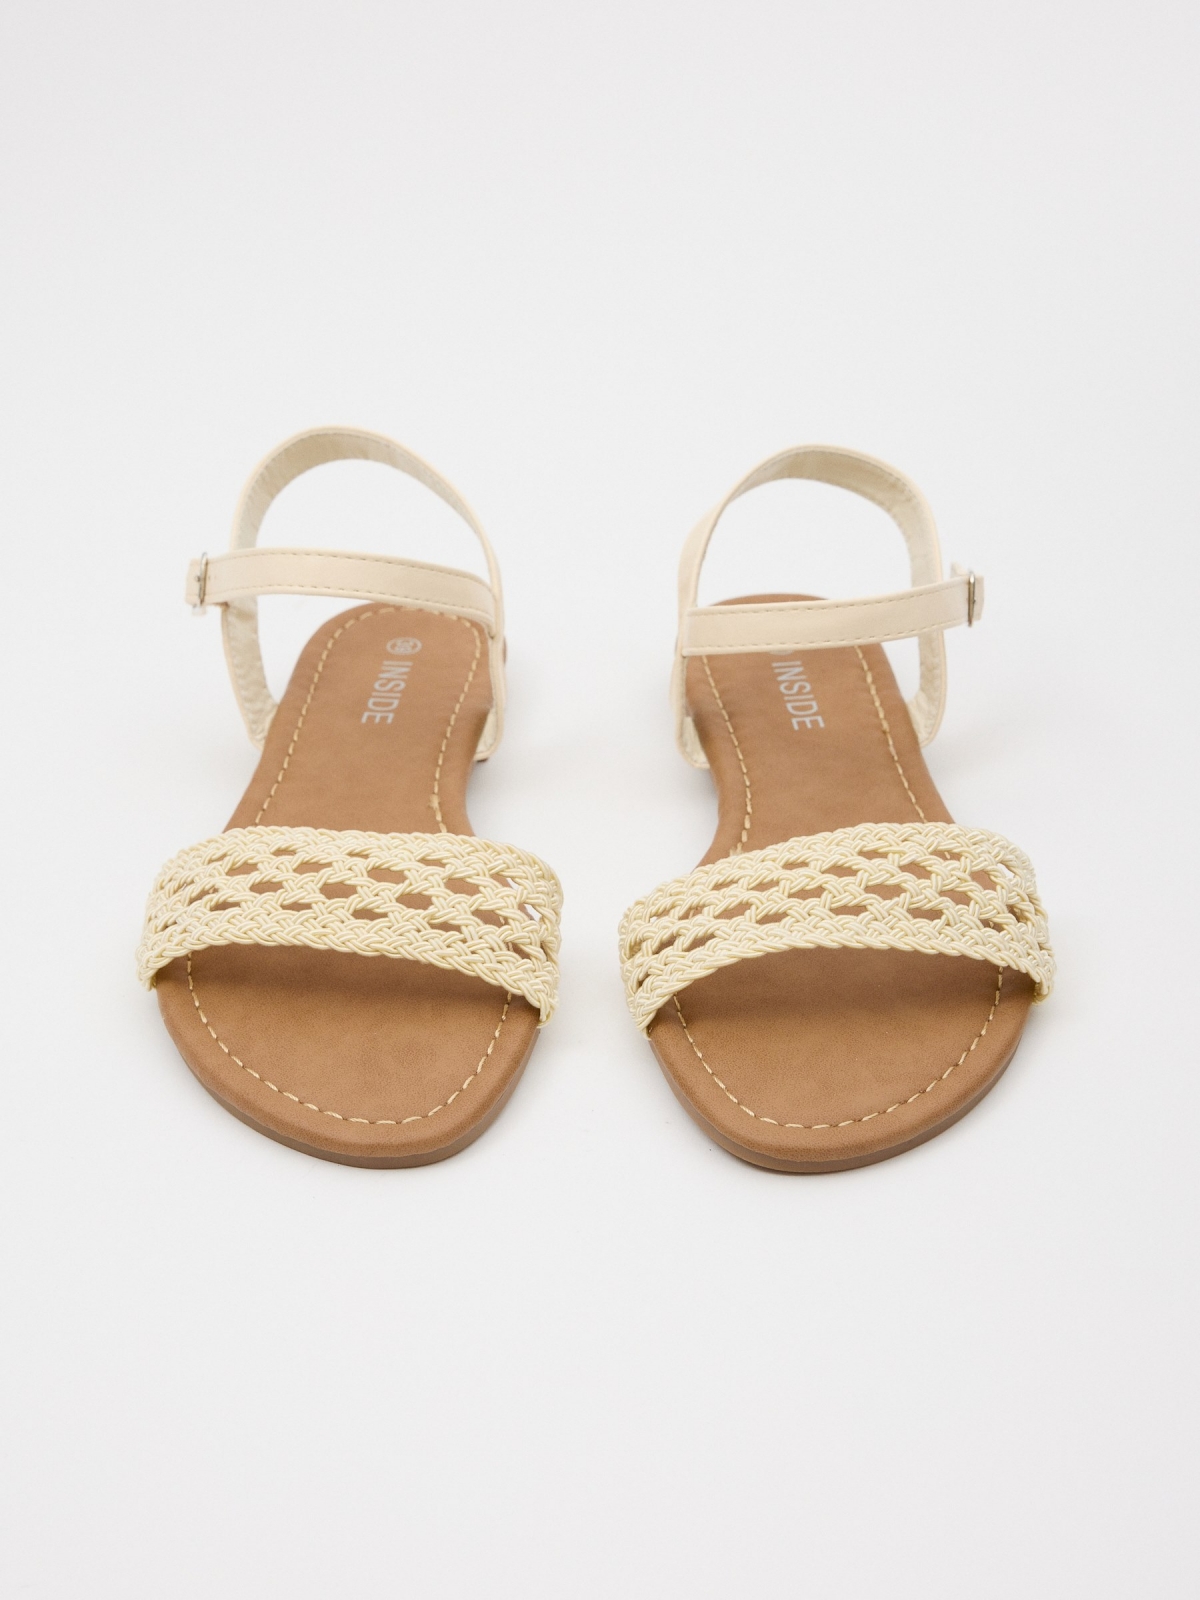 Braided knitted sandal off white zenithal view